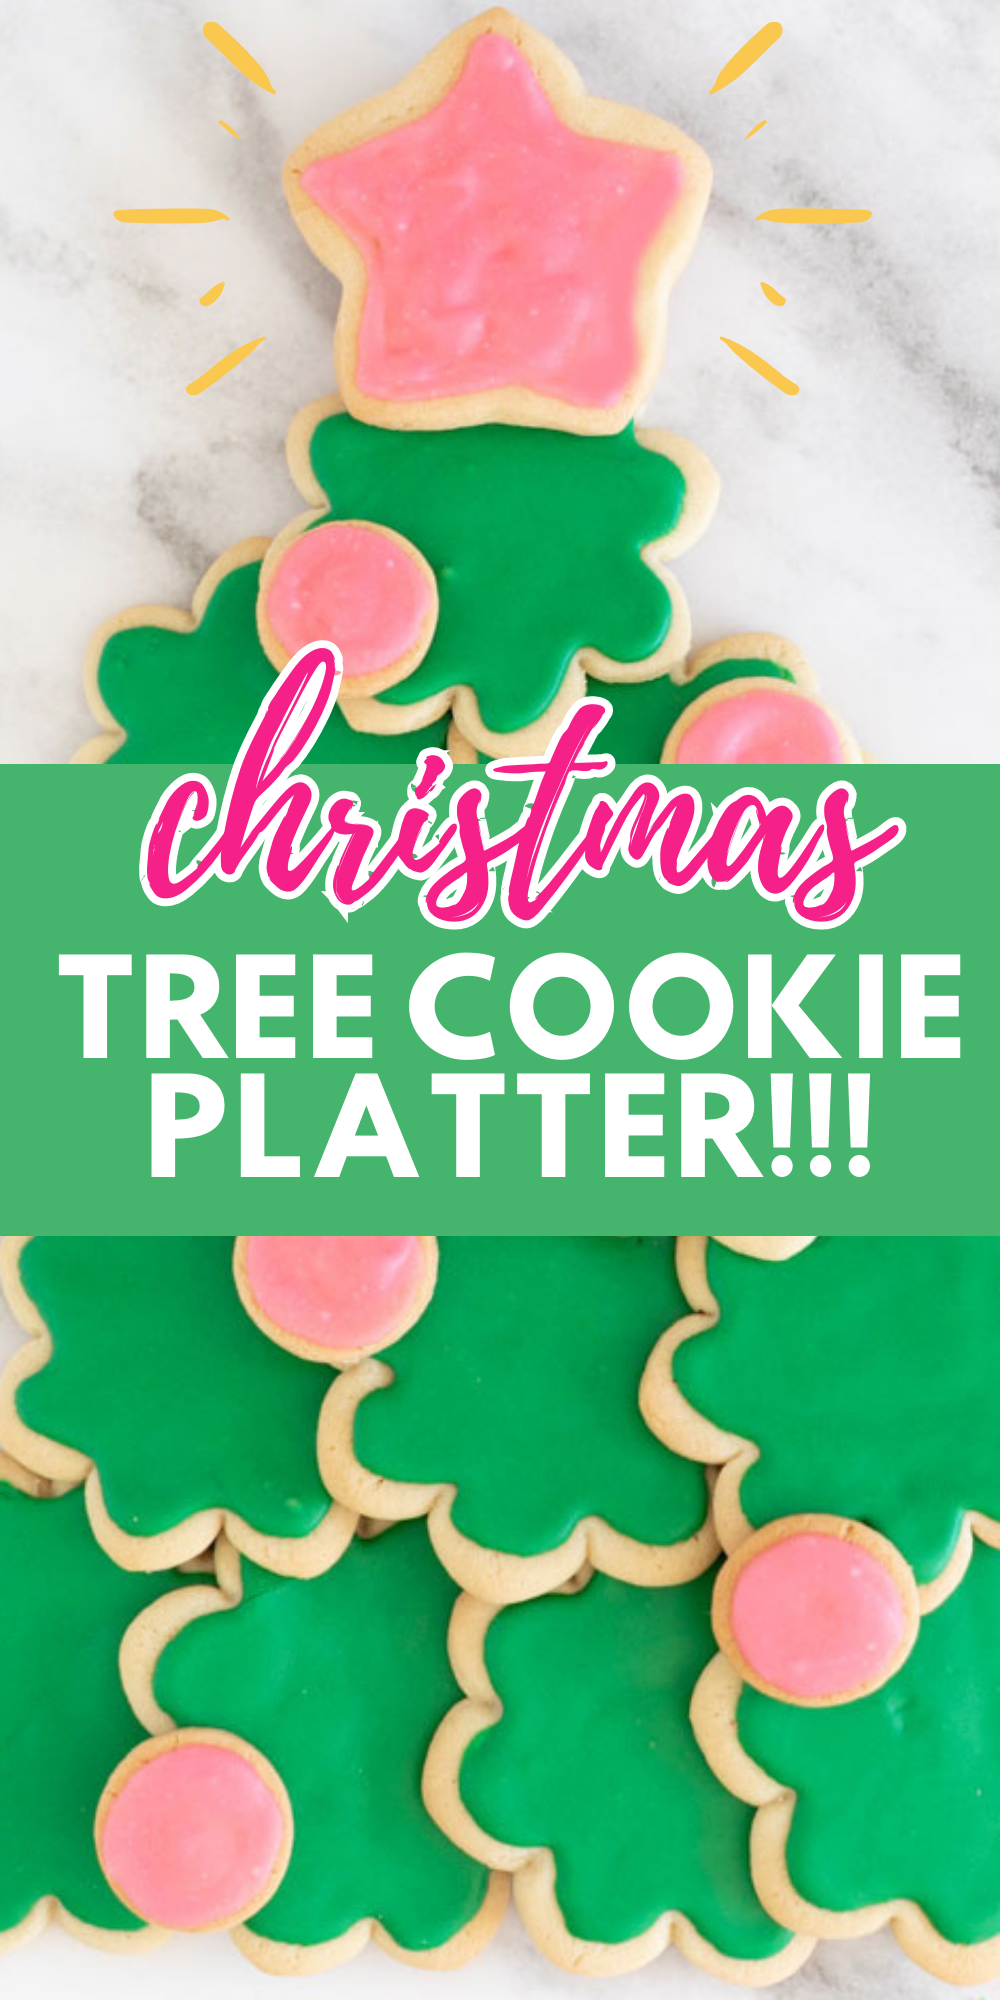 Festive Christmas Tree Cookie Platter made with one roll of store-bought cookie dough, a flower cookie cutter and icings.